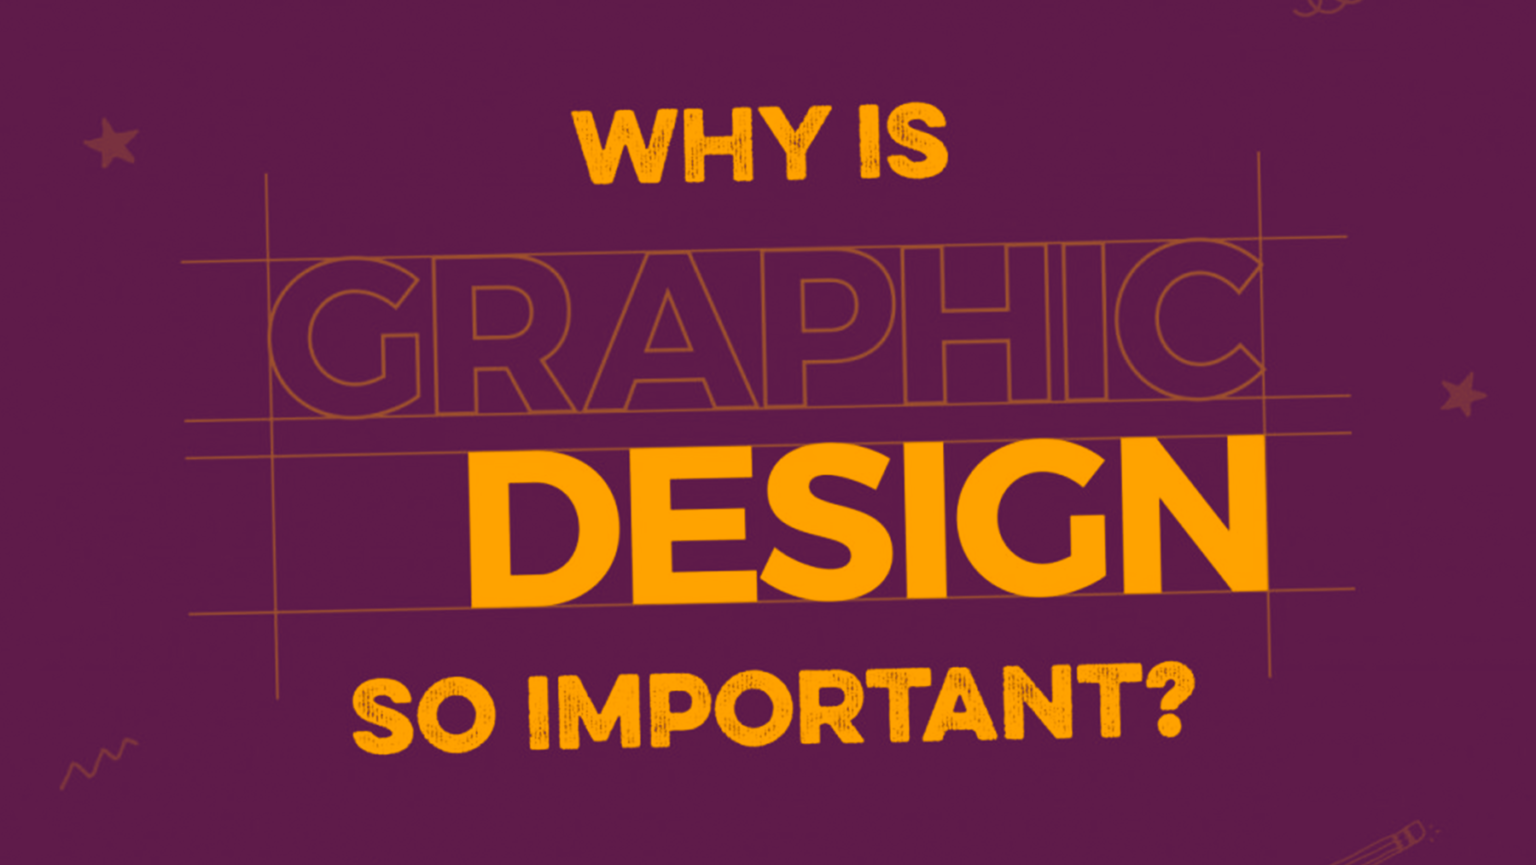 How important is graphics for branding